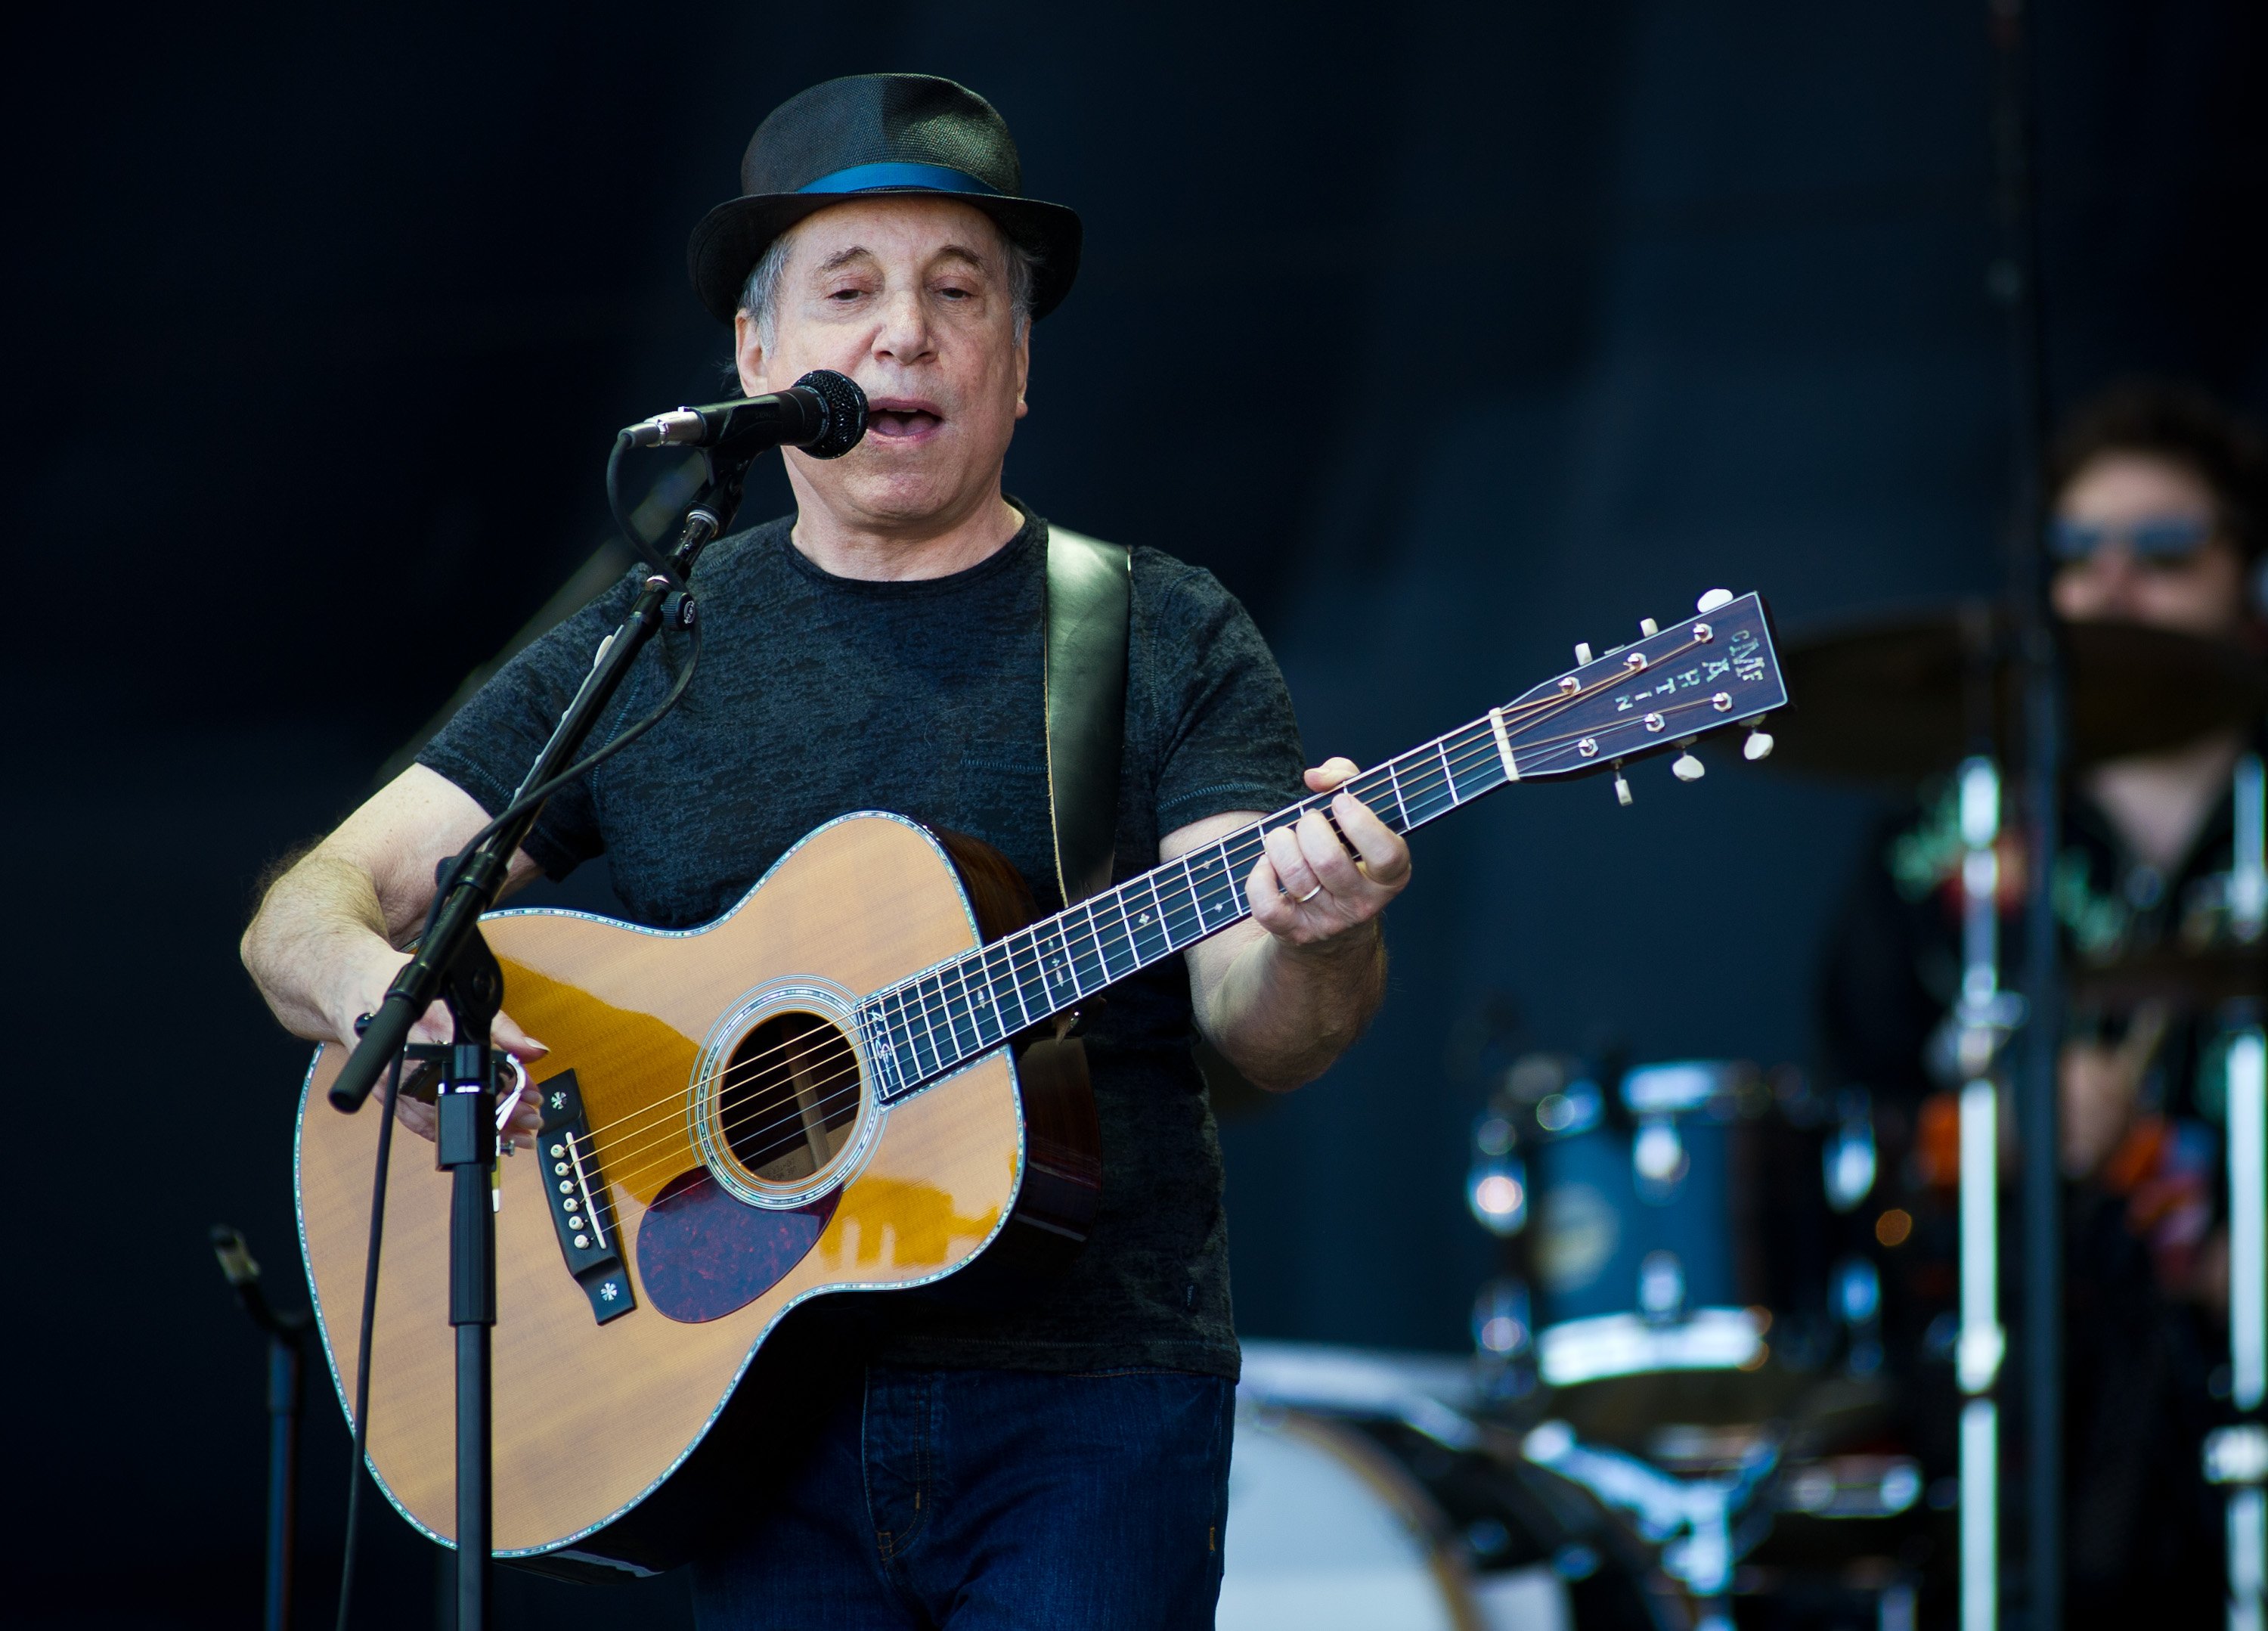 Paul Simon performed at the Glastonbury Festival hosted at Worthy Farm, in Glastonbury, England, on June 26, 2011. | Source: Getty Images